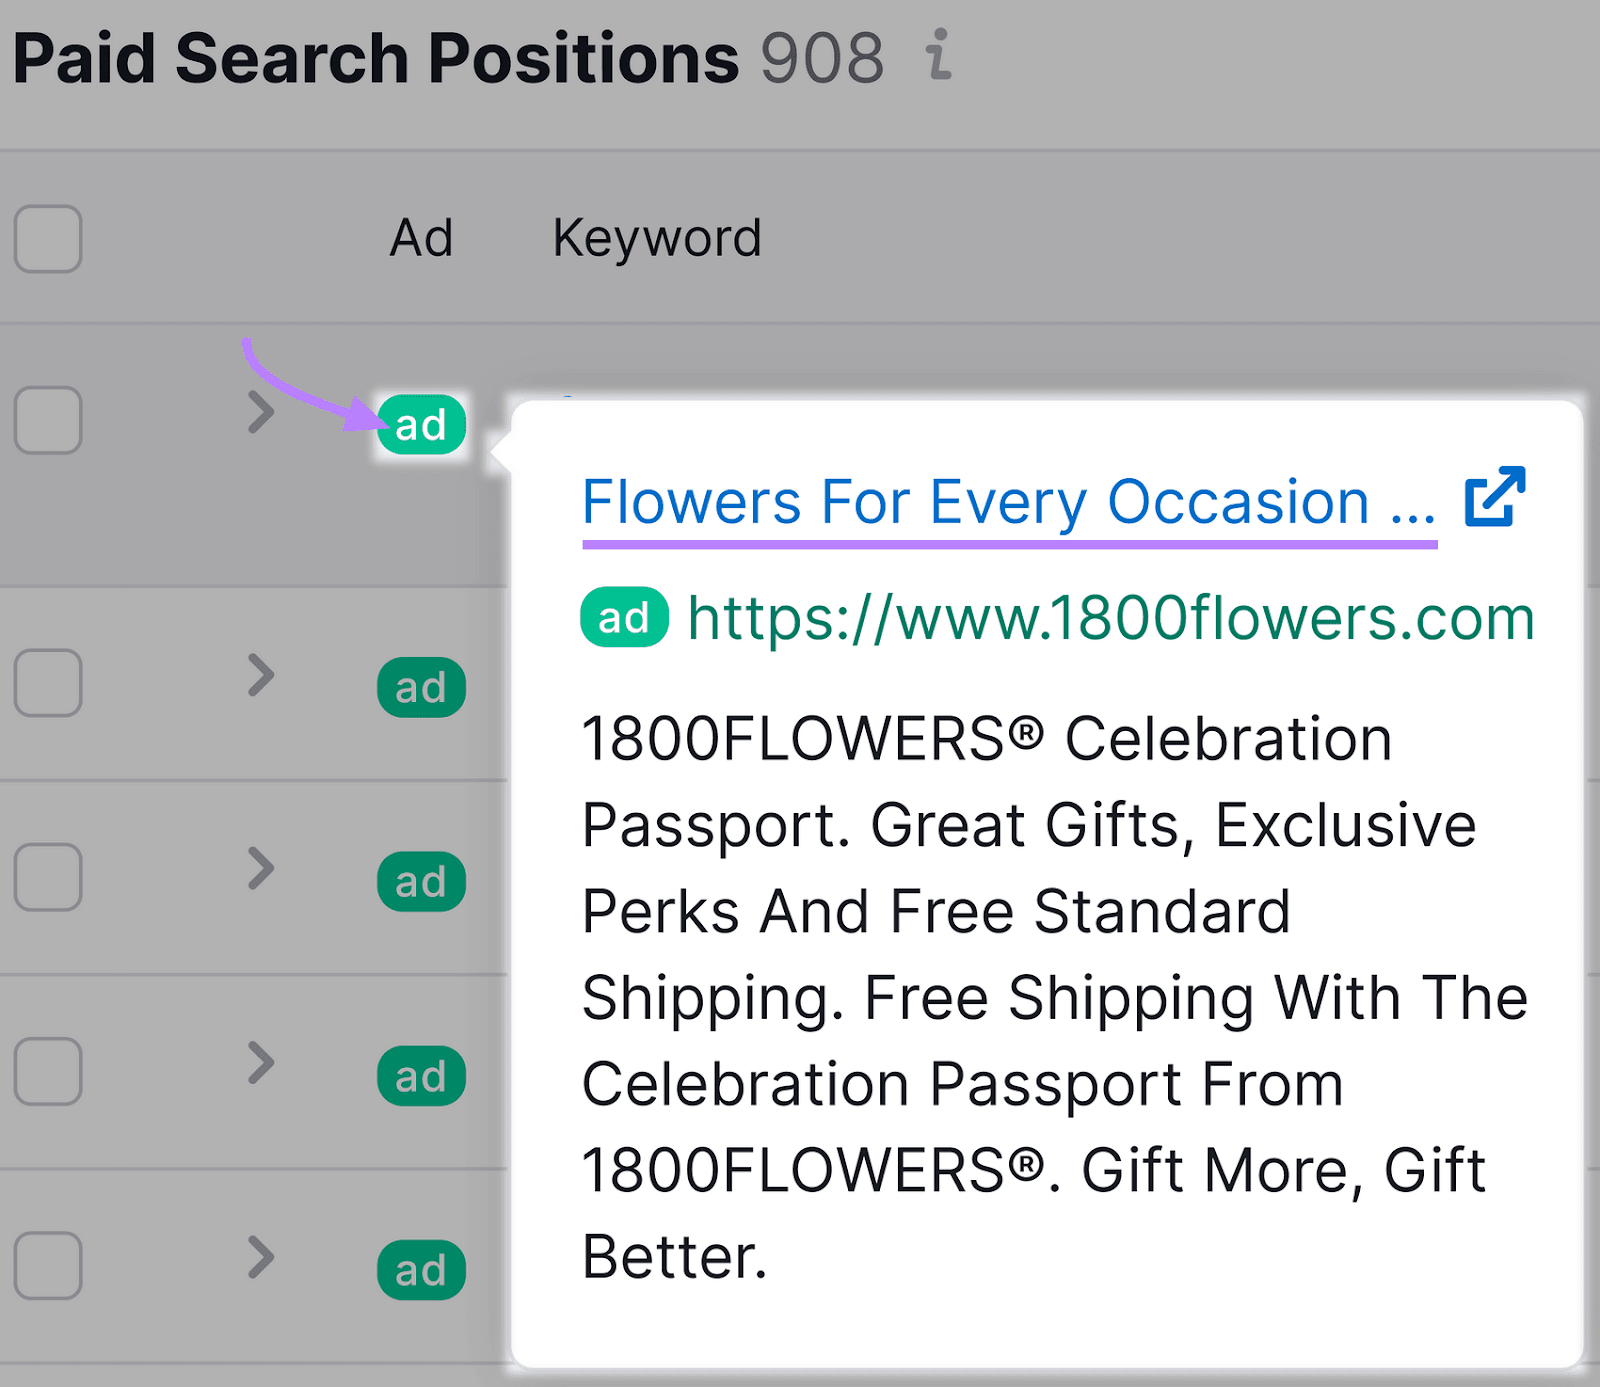 "Paid Search Positions" table, showing an expanded advertisement  for the keyword "flowers" with the rubric  "Flowers For Every Occasion."